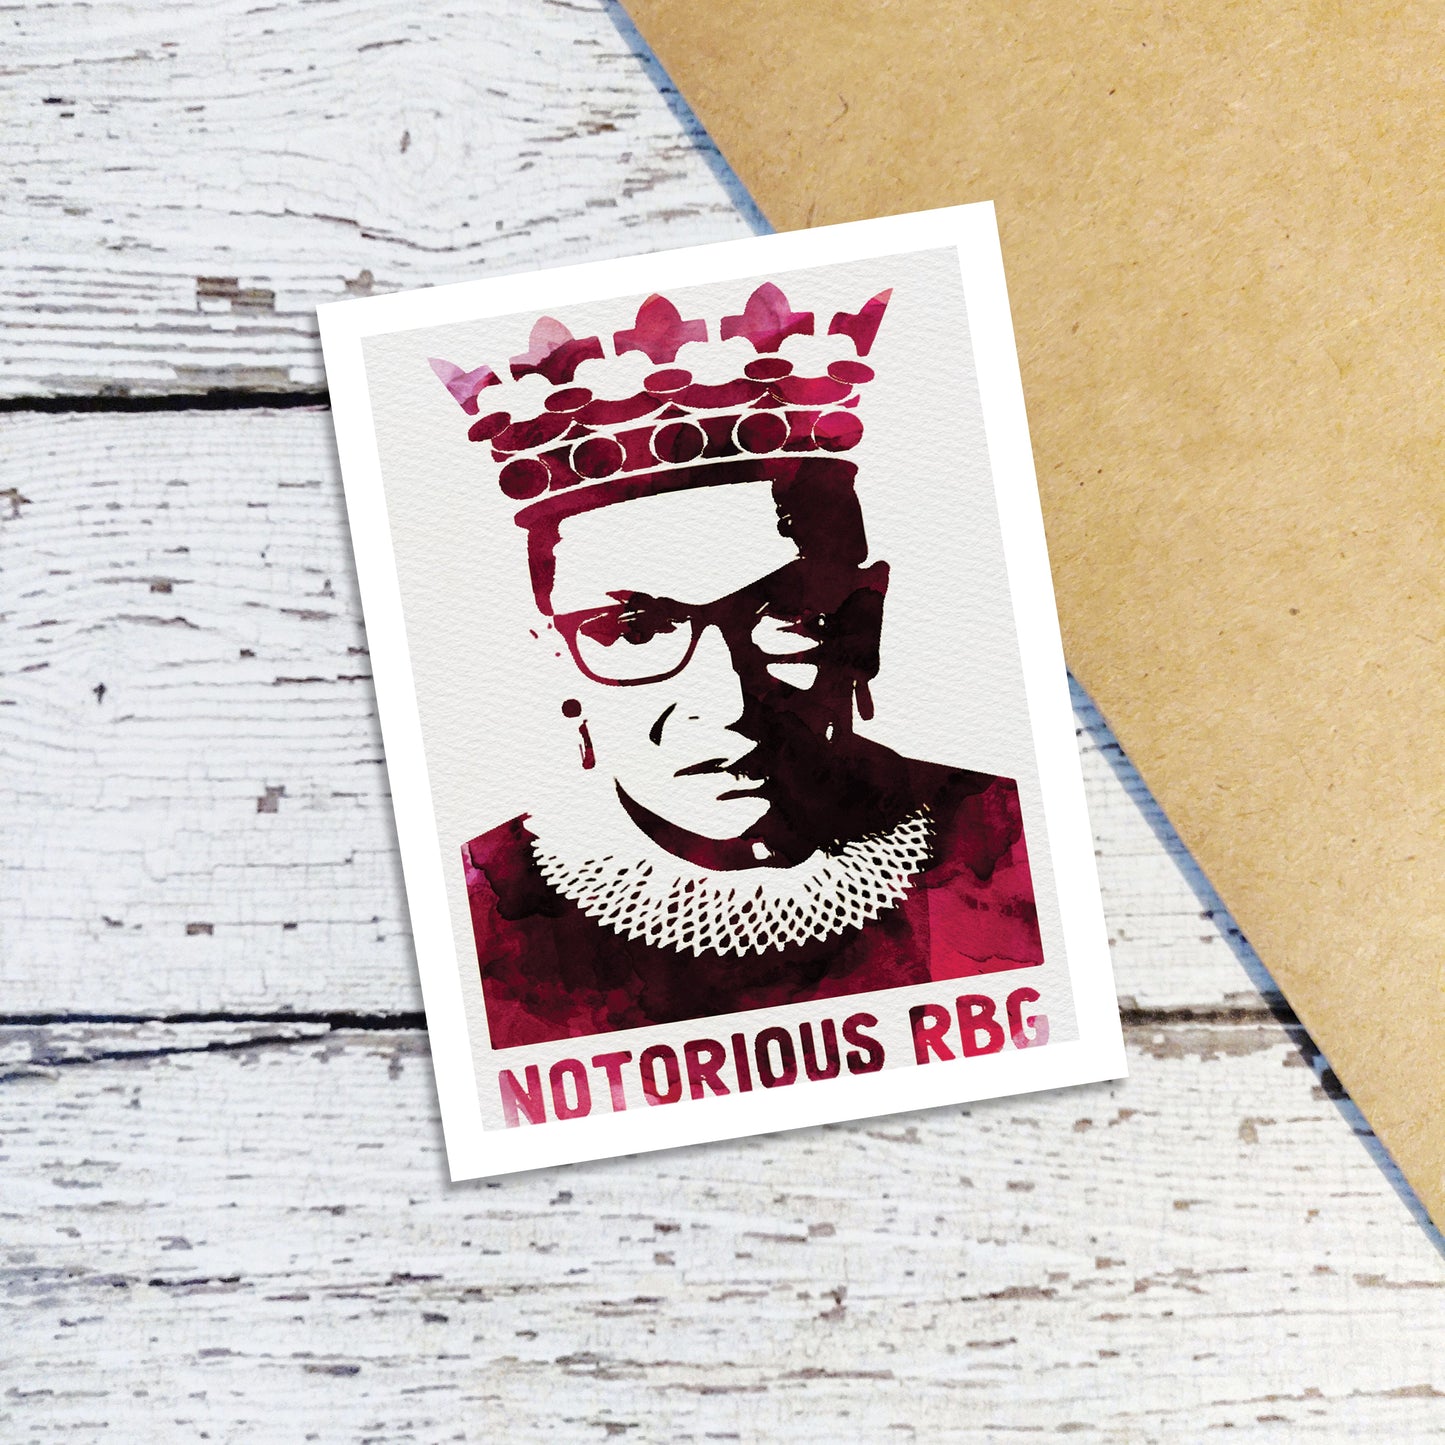 Natorious RBG Note Cards